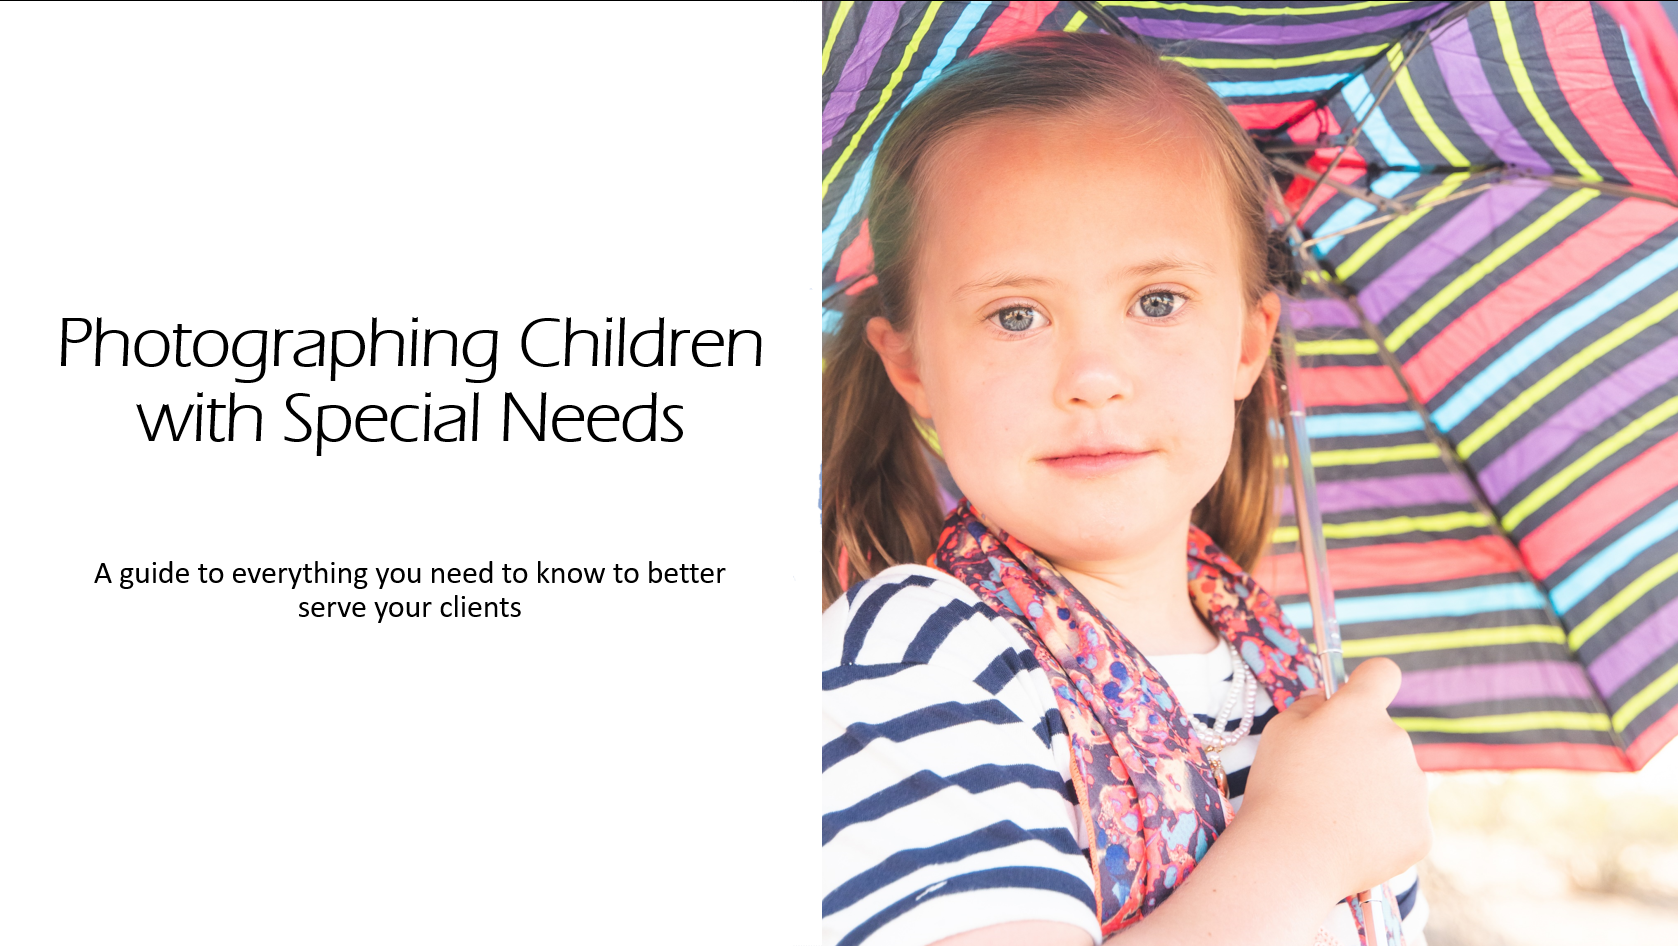 How to Photograph Children with Special Needs